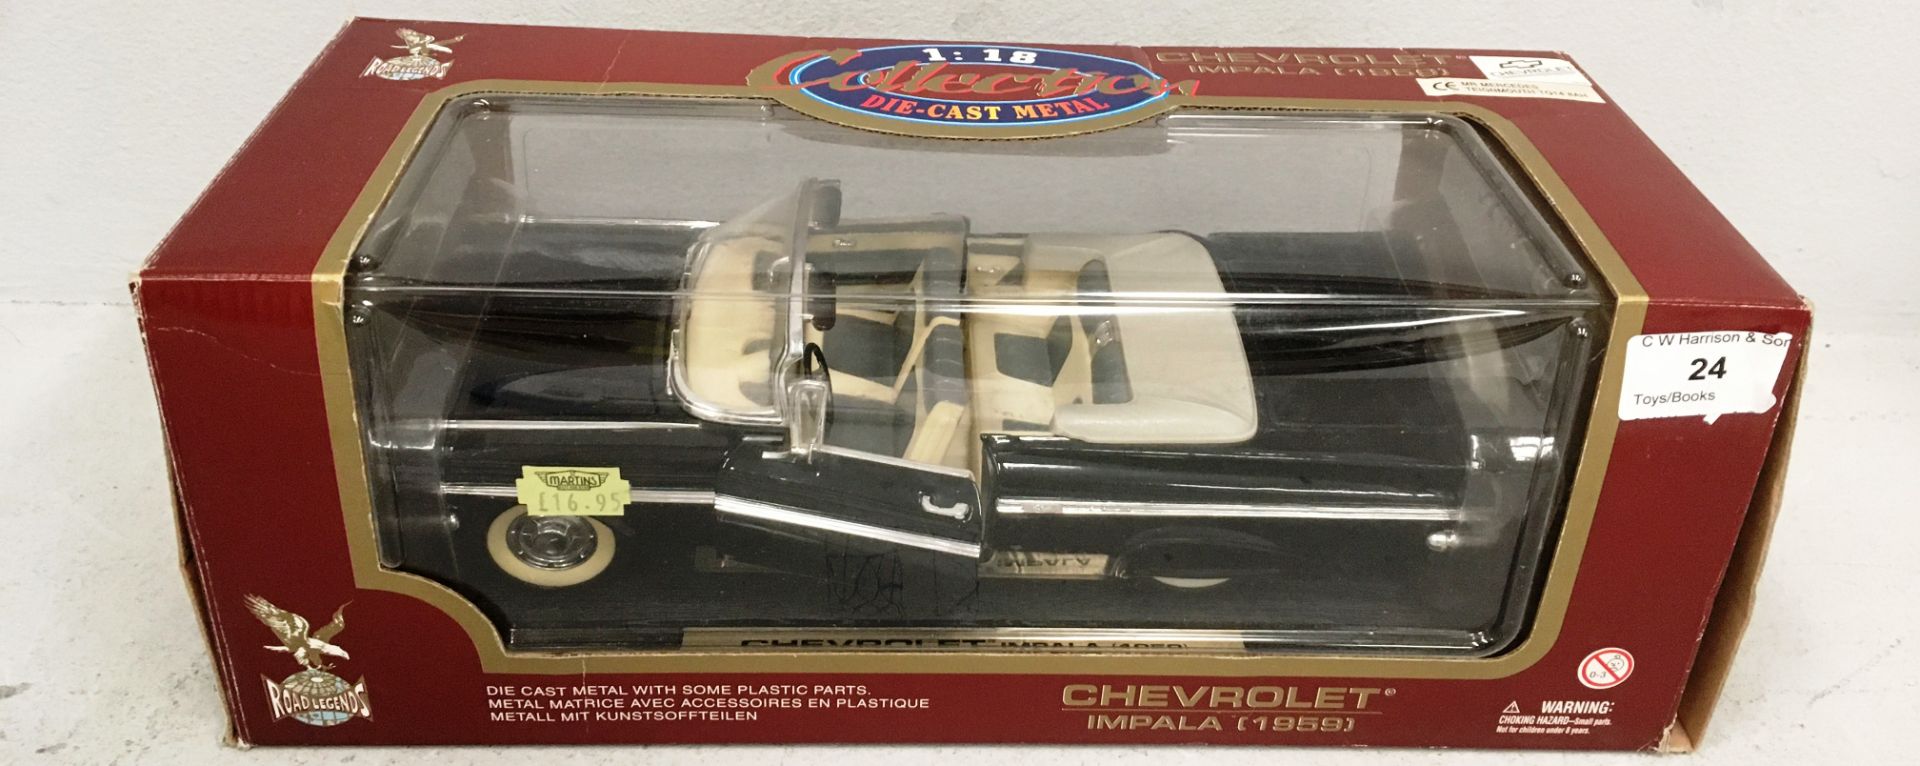 Road Legends 1/18 scale die cast metal model of Chevrolet Impala (1959) (boxed)